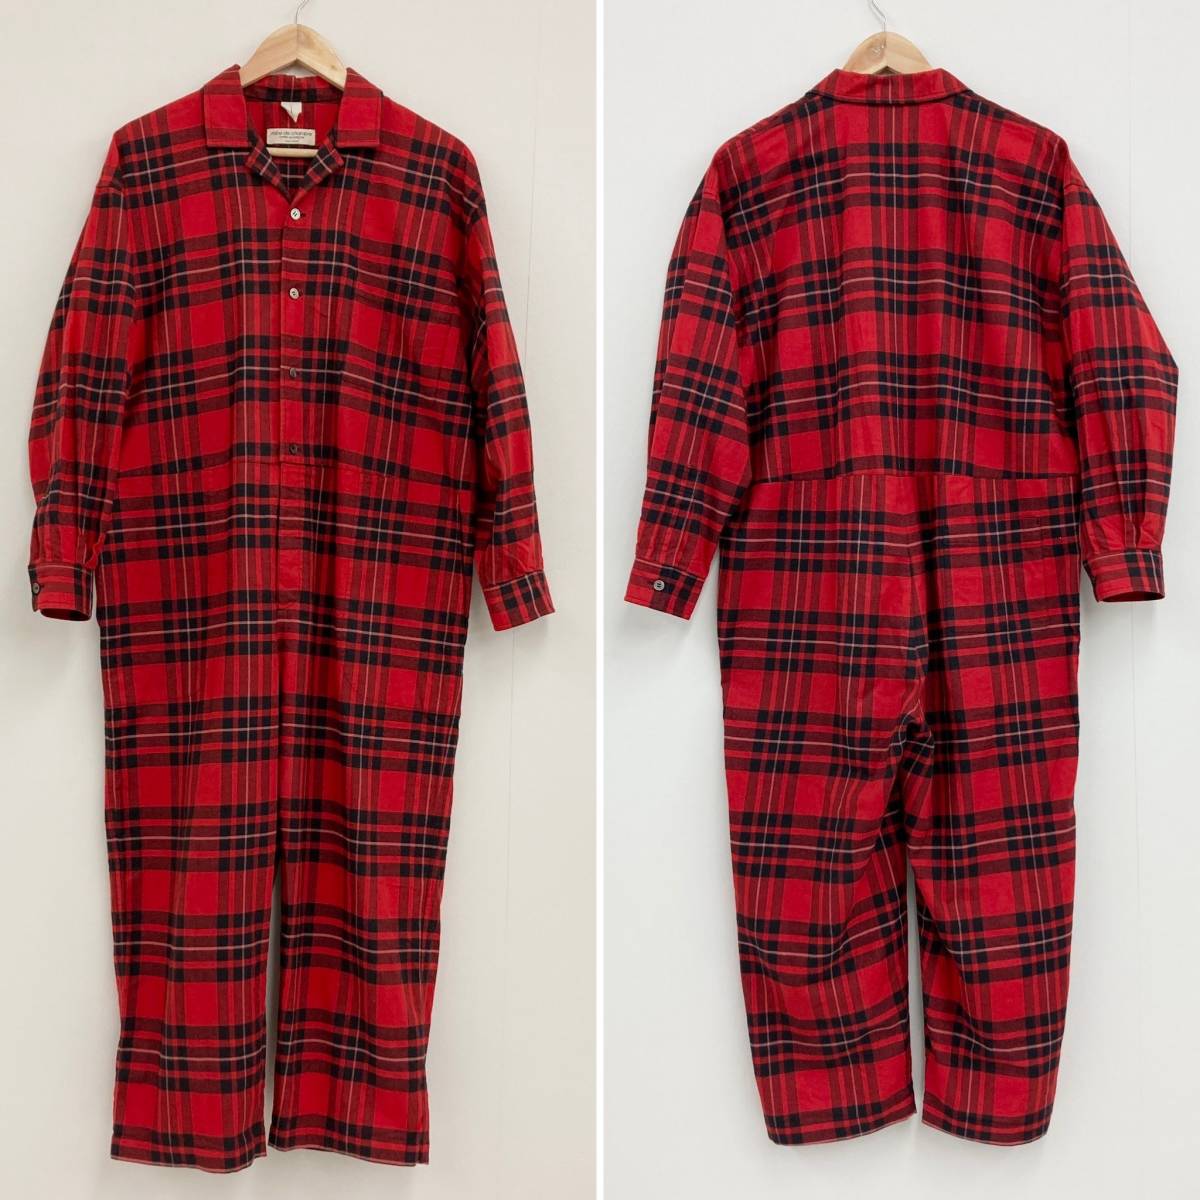 80s 90s robe de chambre COMME des GARCONS vintage ビッグシルエット オールインワン チェック コムデギャルソン つなぎ archive 2060261